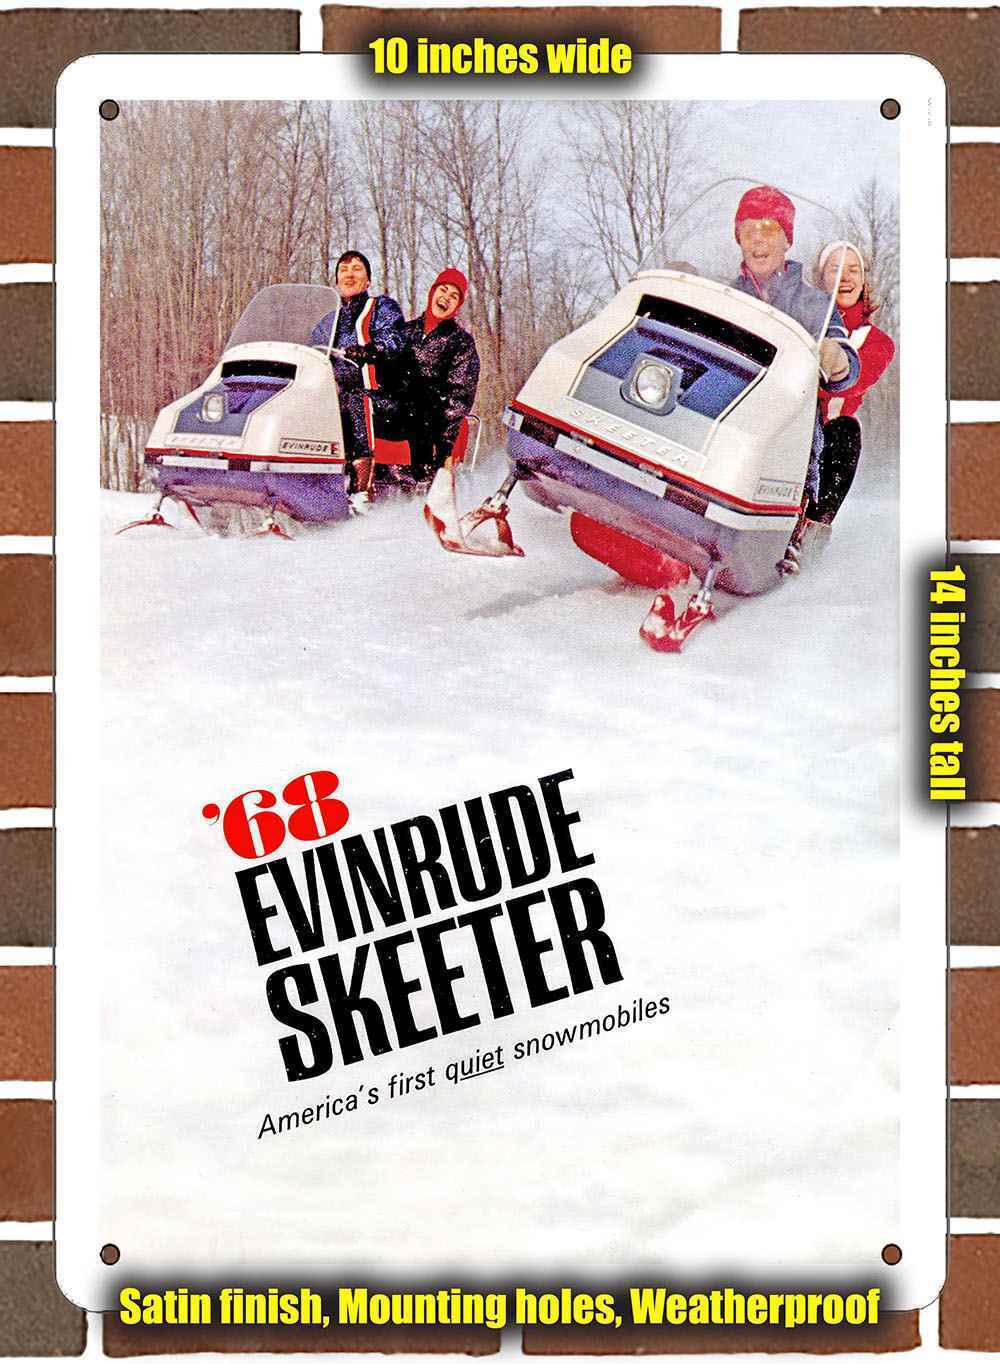 Metal Sign - 1968 Evinrude Skeeter Snowmobiles- 10x14 inches